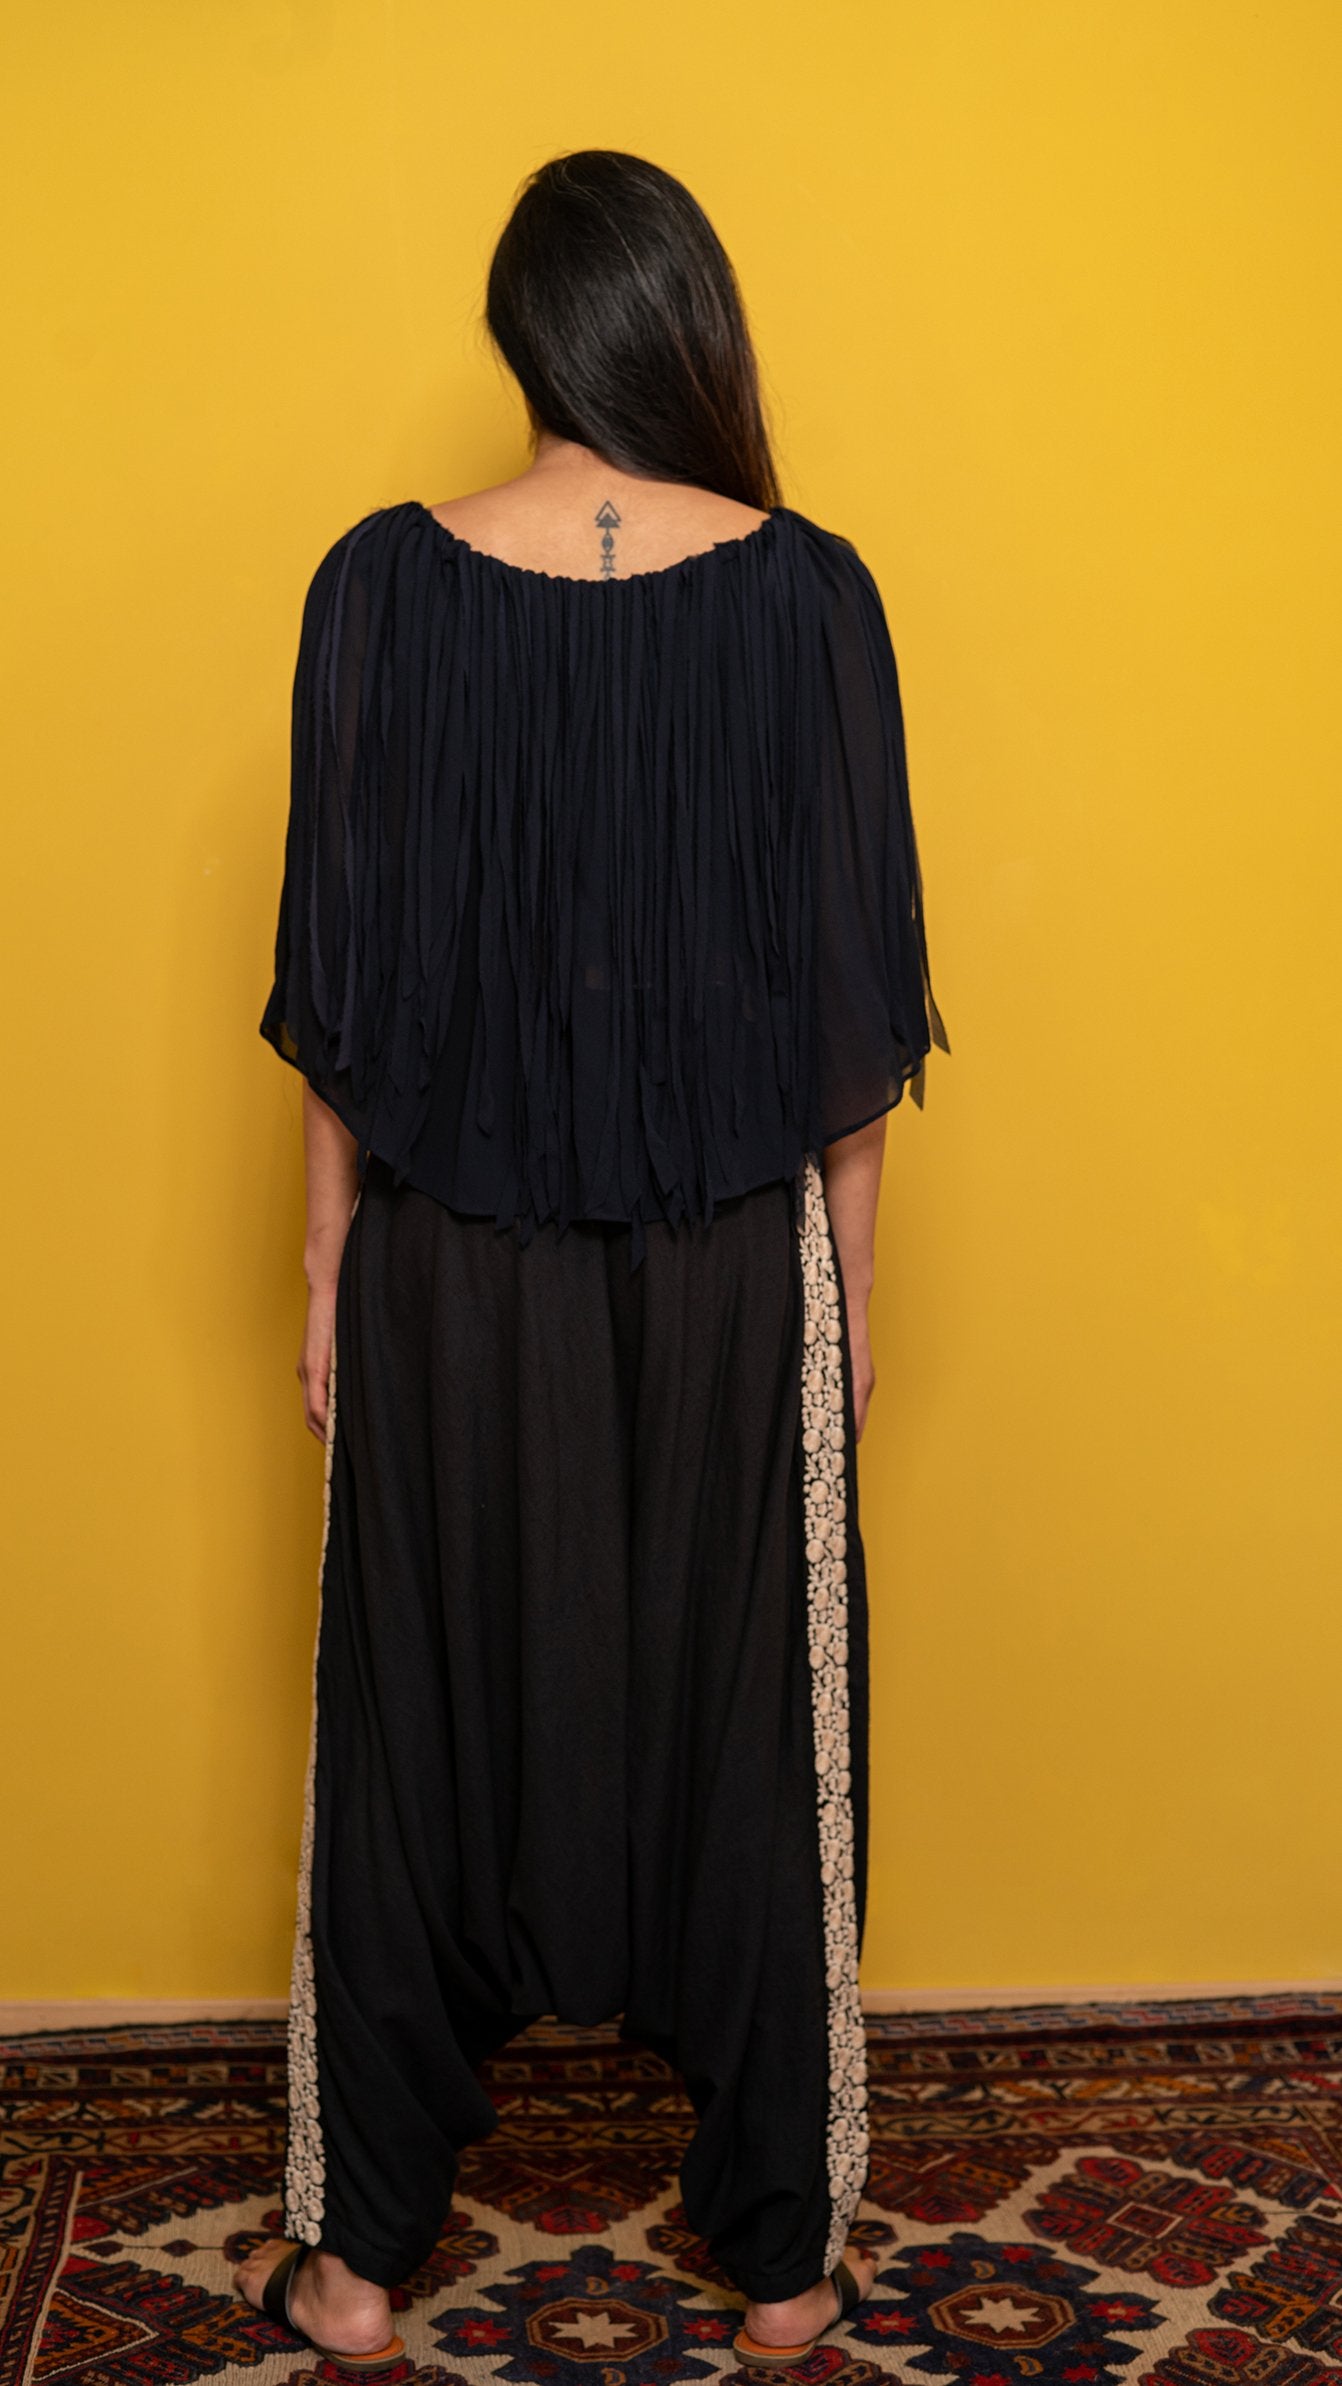 Cape top with fringe